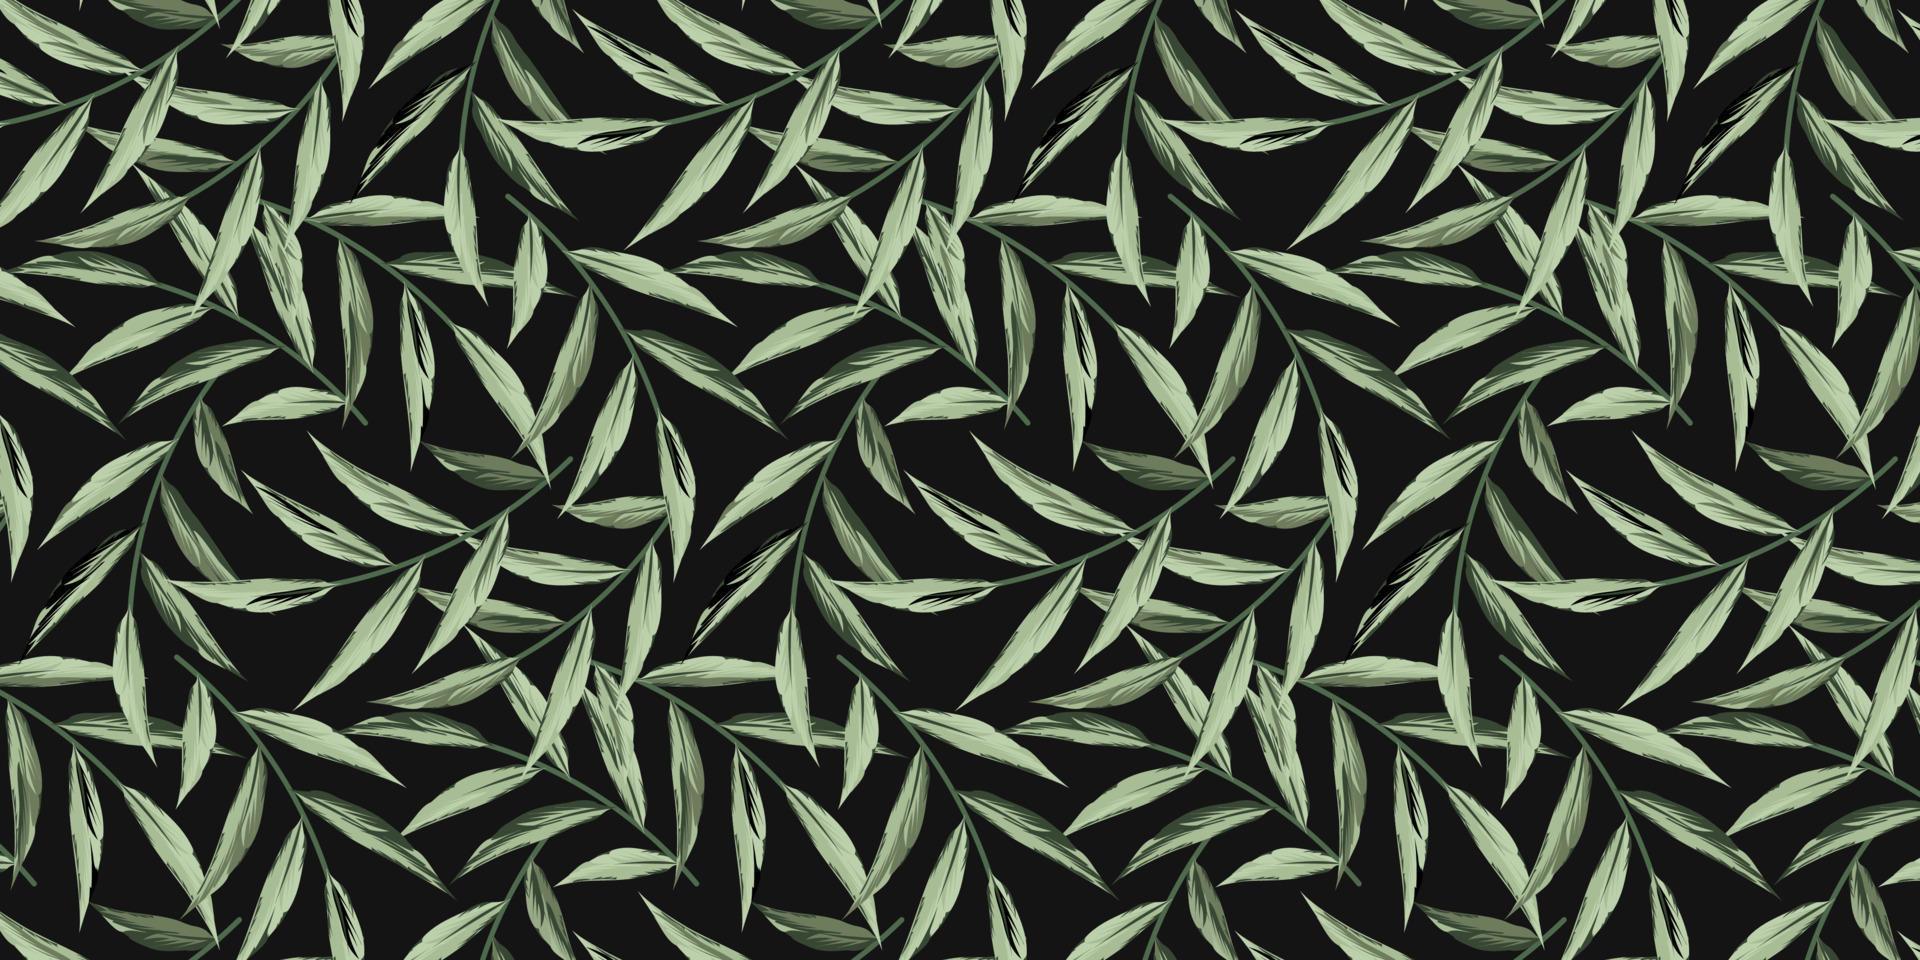 Bamboo leaves seamless pattern. For outfit fashion, fabric or decor. Find fill pattern on swatches vector